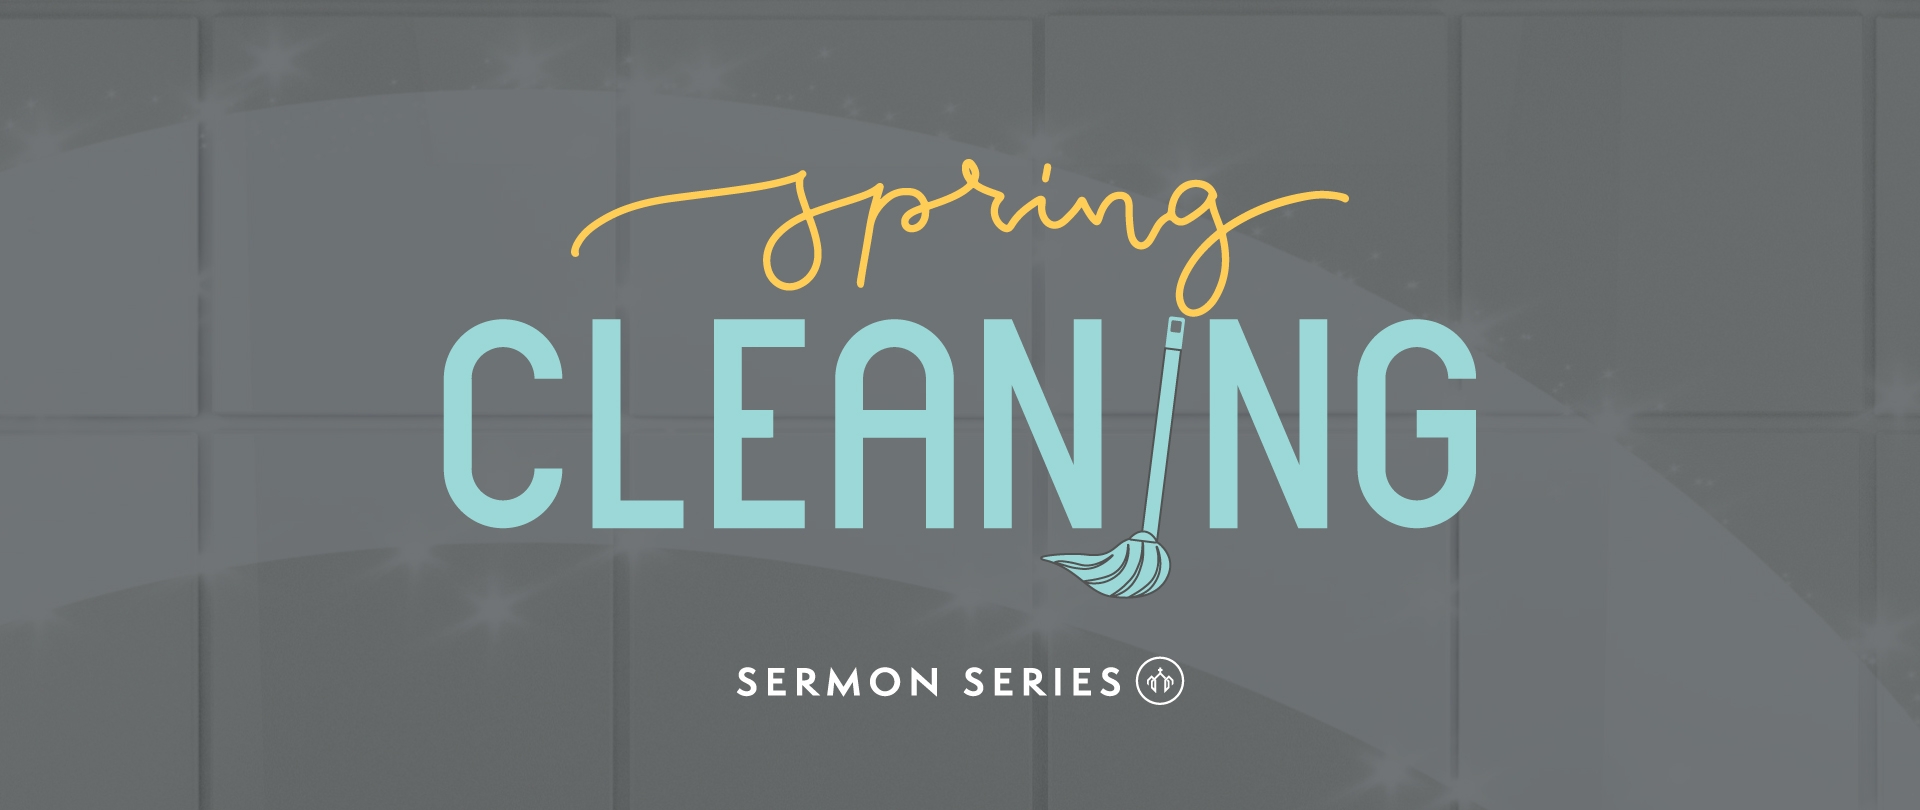 Spring Cleaning - Sermon Series